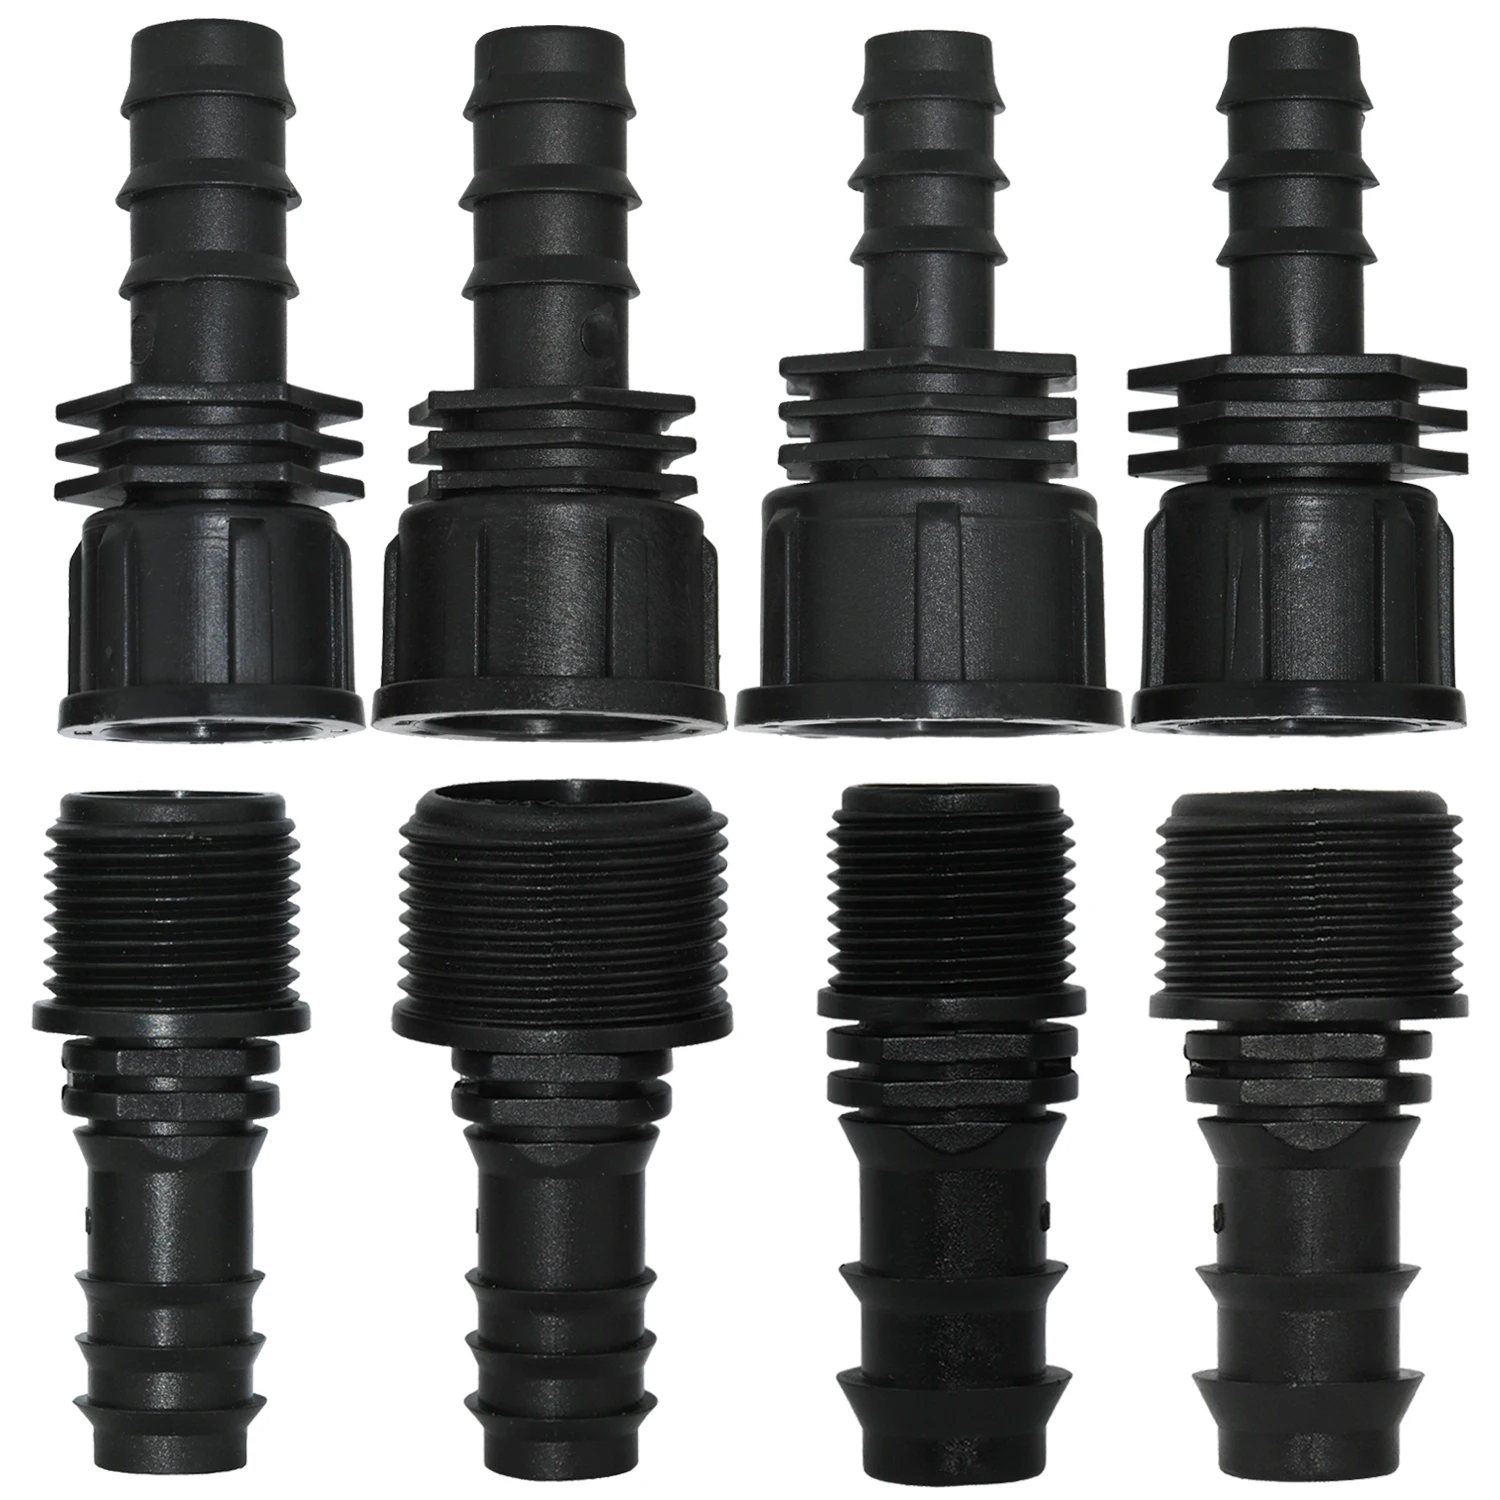 

KESLA 4PCS Male Female 1/2" 3/4" Thread Connector To Barb 16mm 20mm 25 PE Hose Adapter Drip Irrigation System Garden Pipe Repair